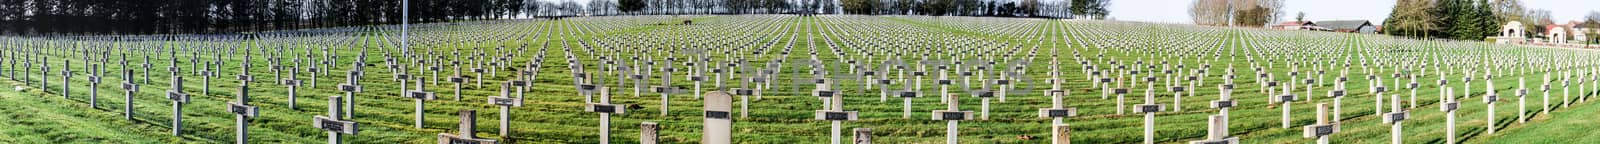 Panorama Cemetery world war one in France Vimy La Targette